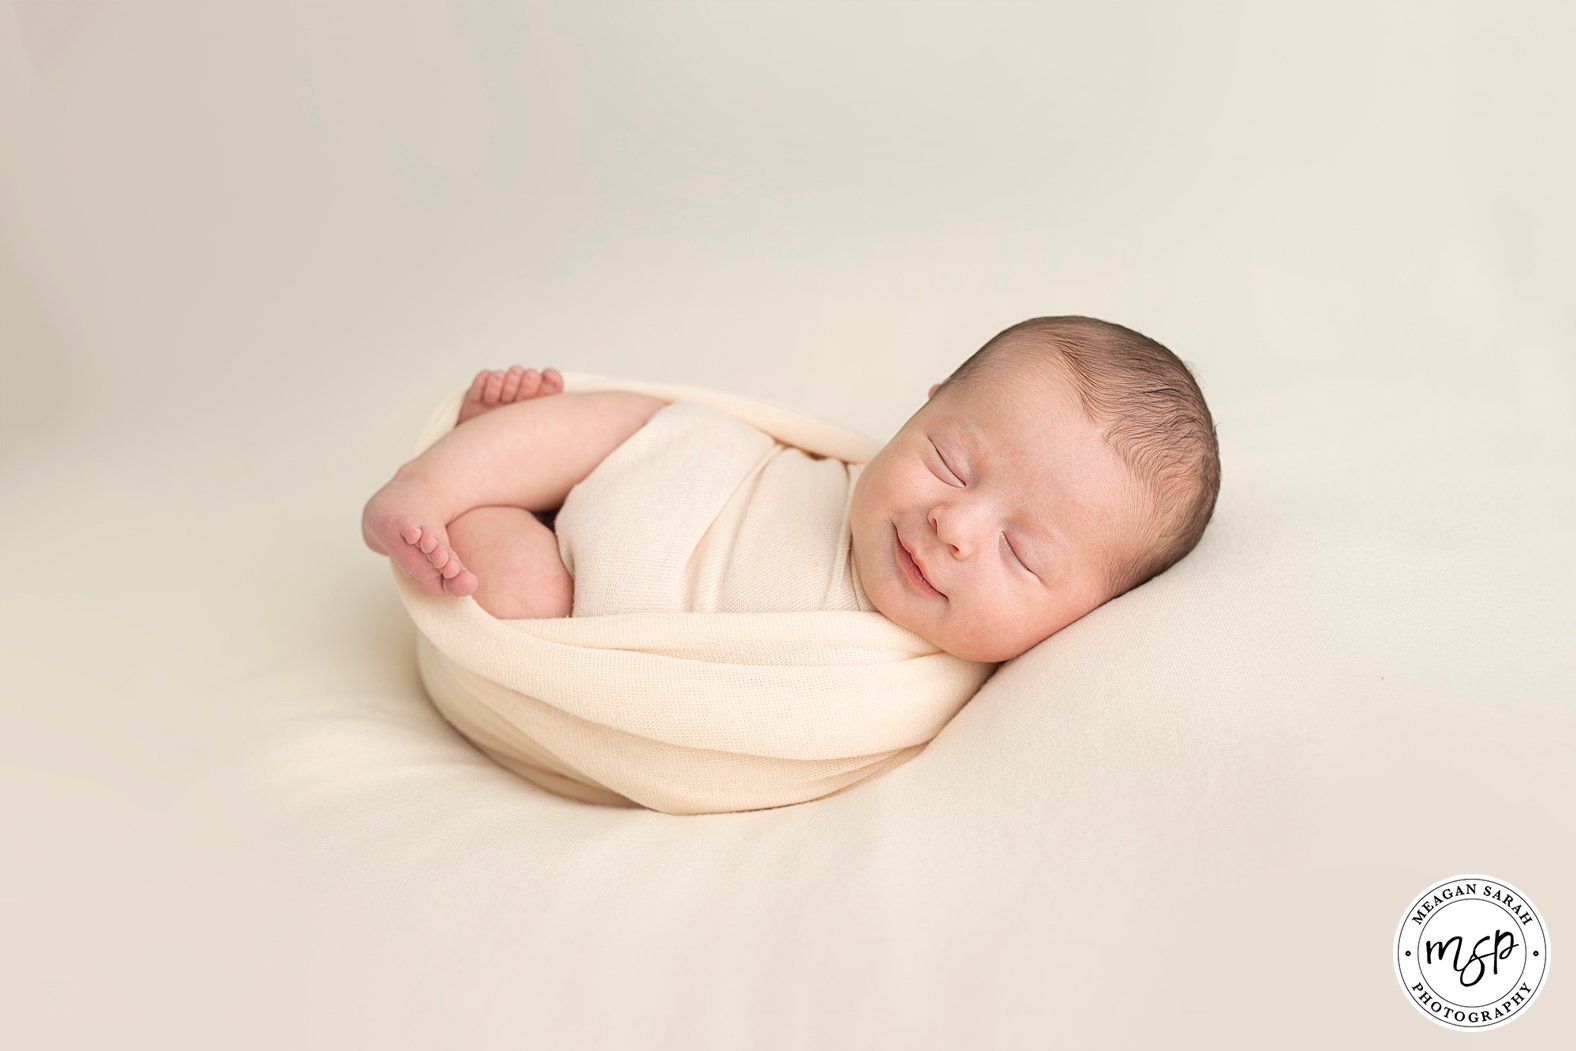 Light Peach,Turtle on back,Baby Photographer Leeds,Baby Photography Leeds,Leeds Newborn Photographer,Leeds Newborn Photography,Leeds Photographer,Professional Photographer in Leeds,West Yorkshire Photographer,Yorkshire Newborn Photographer,Yorkshire Newborn Photography,